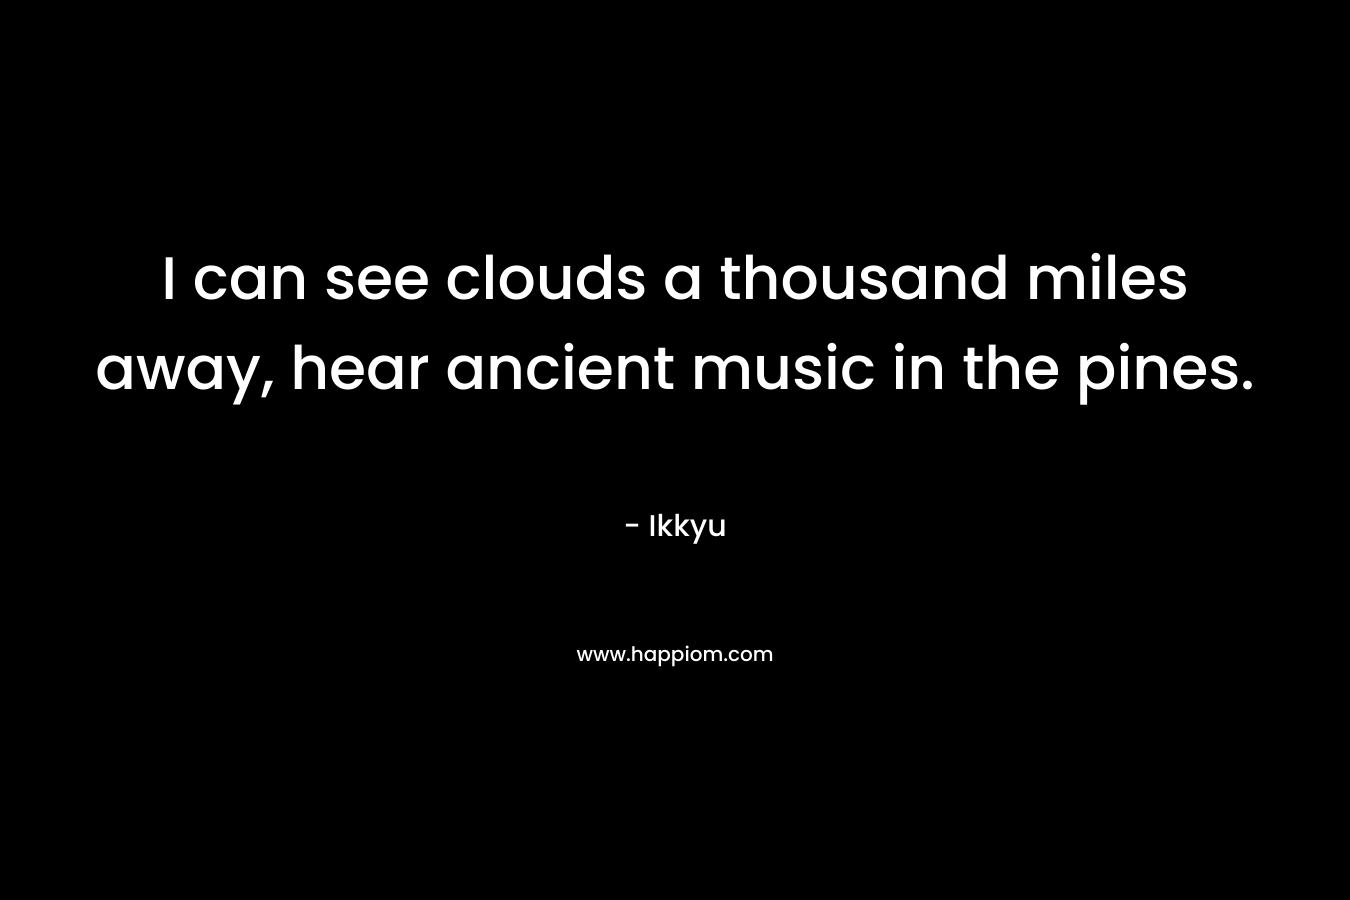 I can see clouds a thousand miles away, hear ancient music in the pines. – Ikkyu